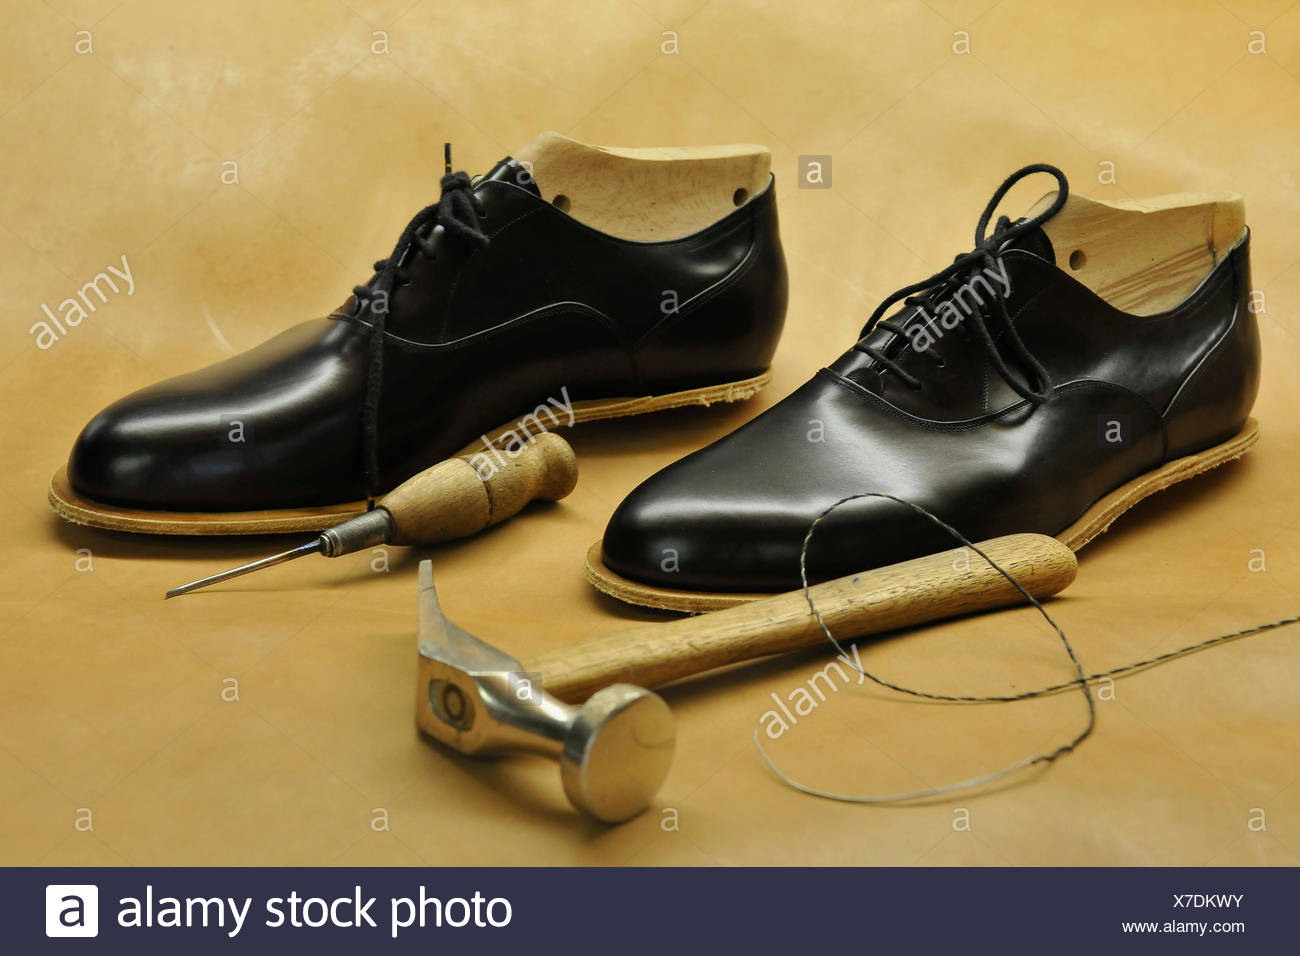 Shoemaker Shoes High Resolution Stock 